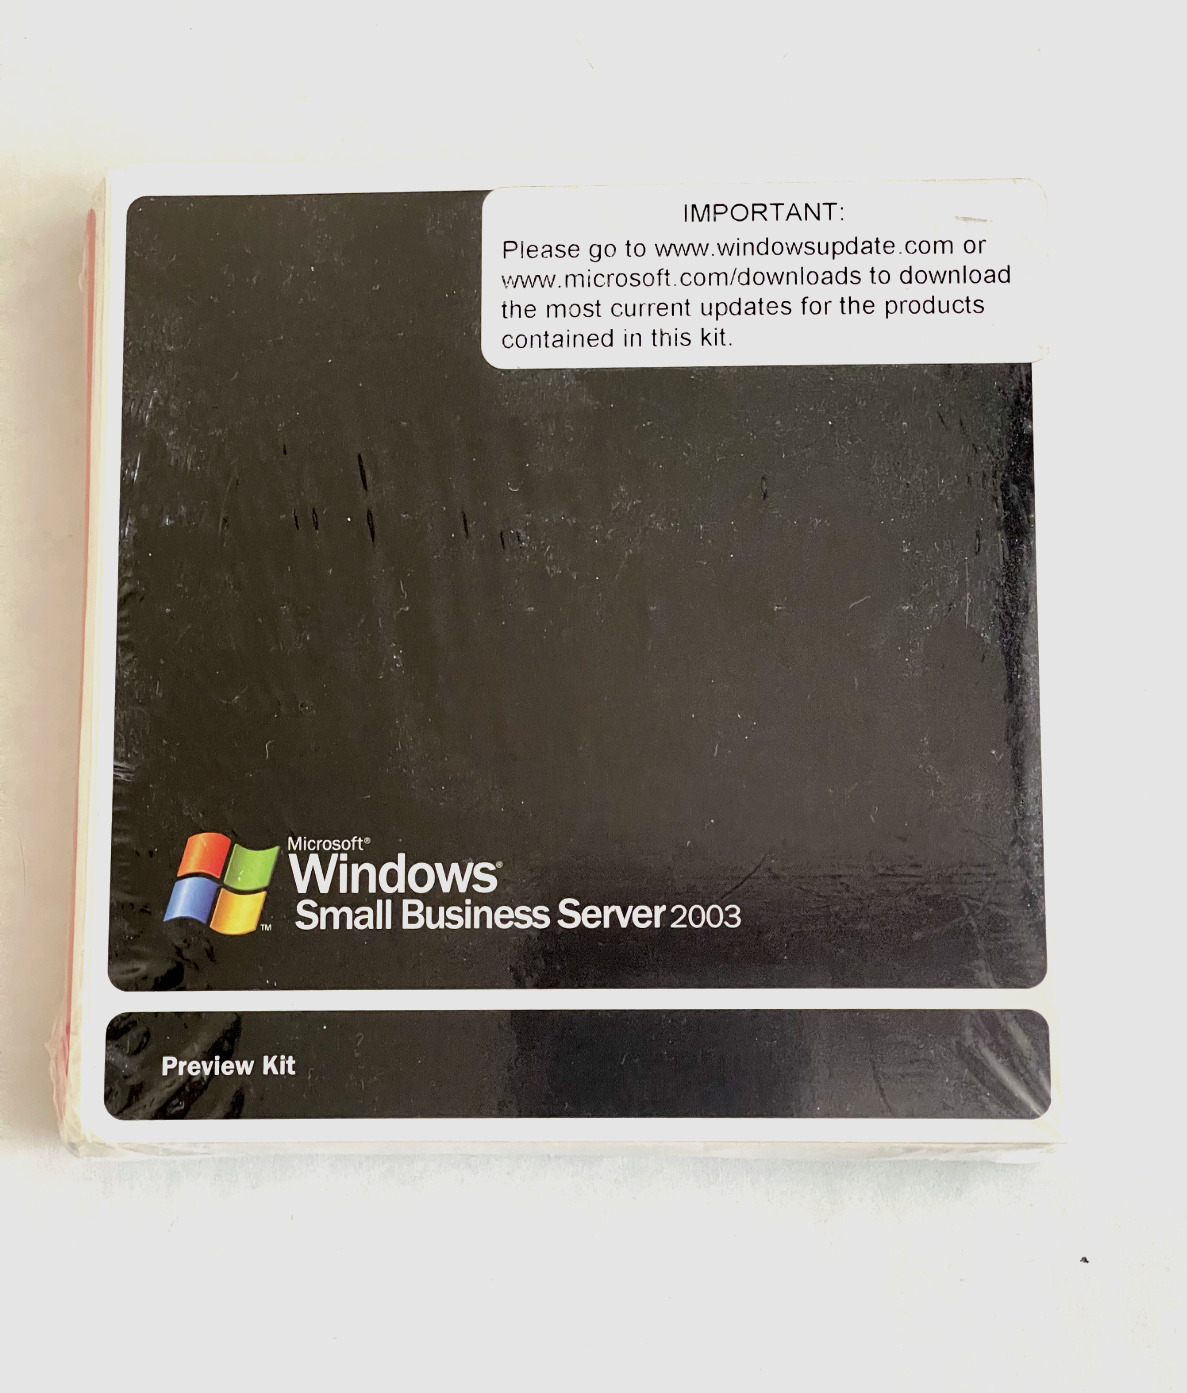 Microsoft Windows Small Business Server 2003 Preview Kit